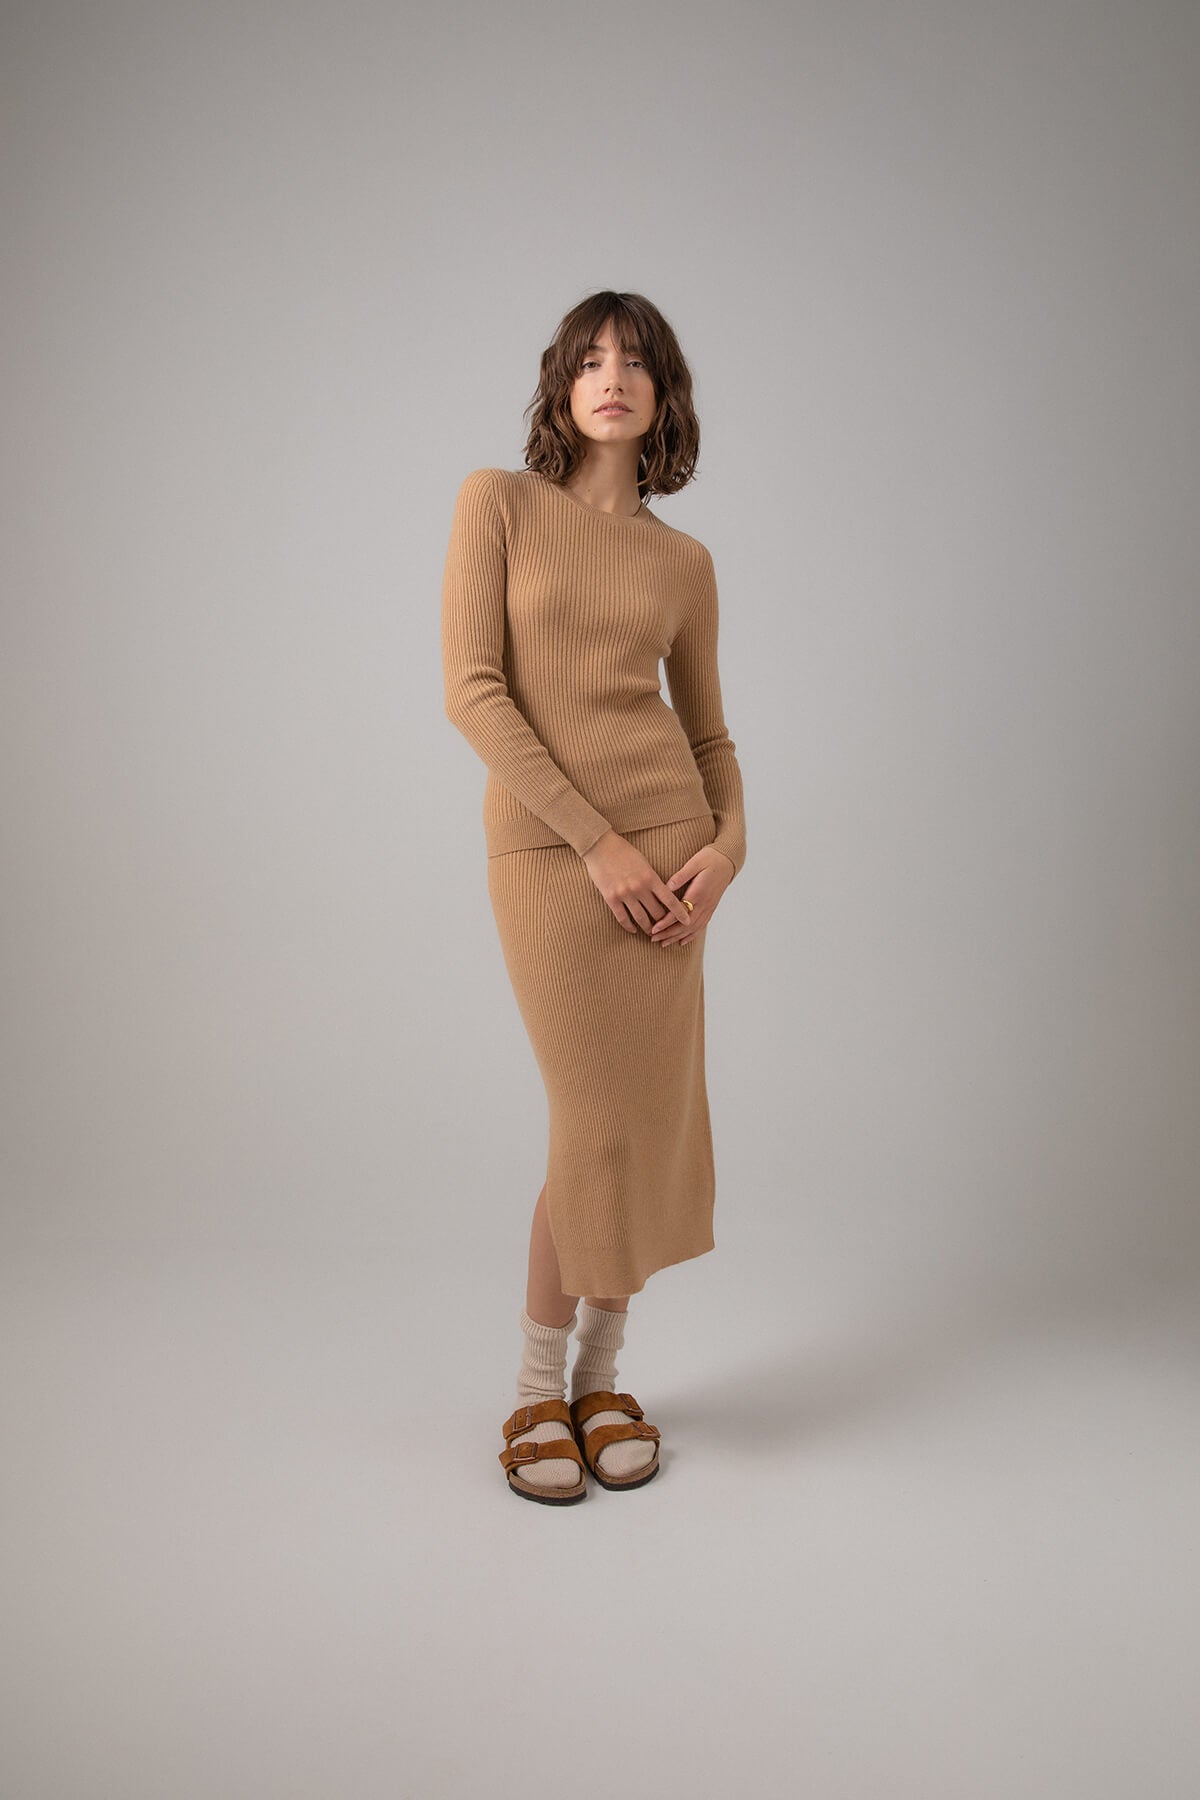 Johnstons of Elgin Ribbed Tube Cashmere Skirt in Camel worn with matching Slim Fit Cashmere Sweater on a grey background KBP00923HB4315